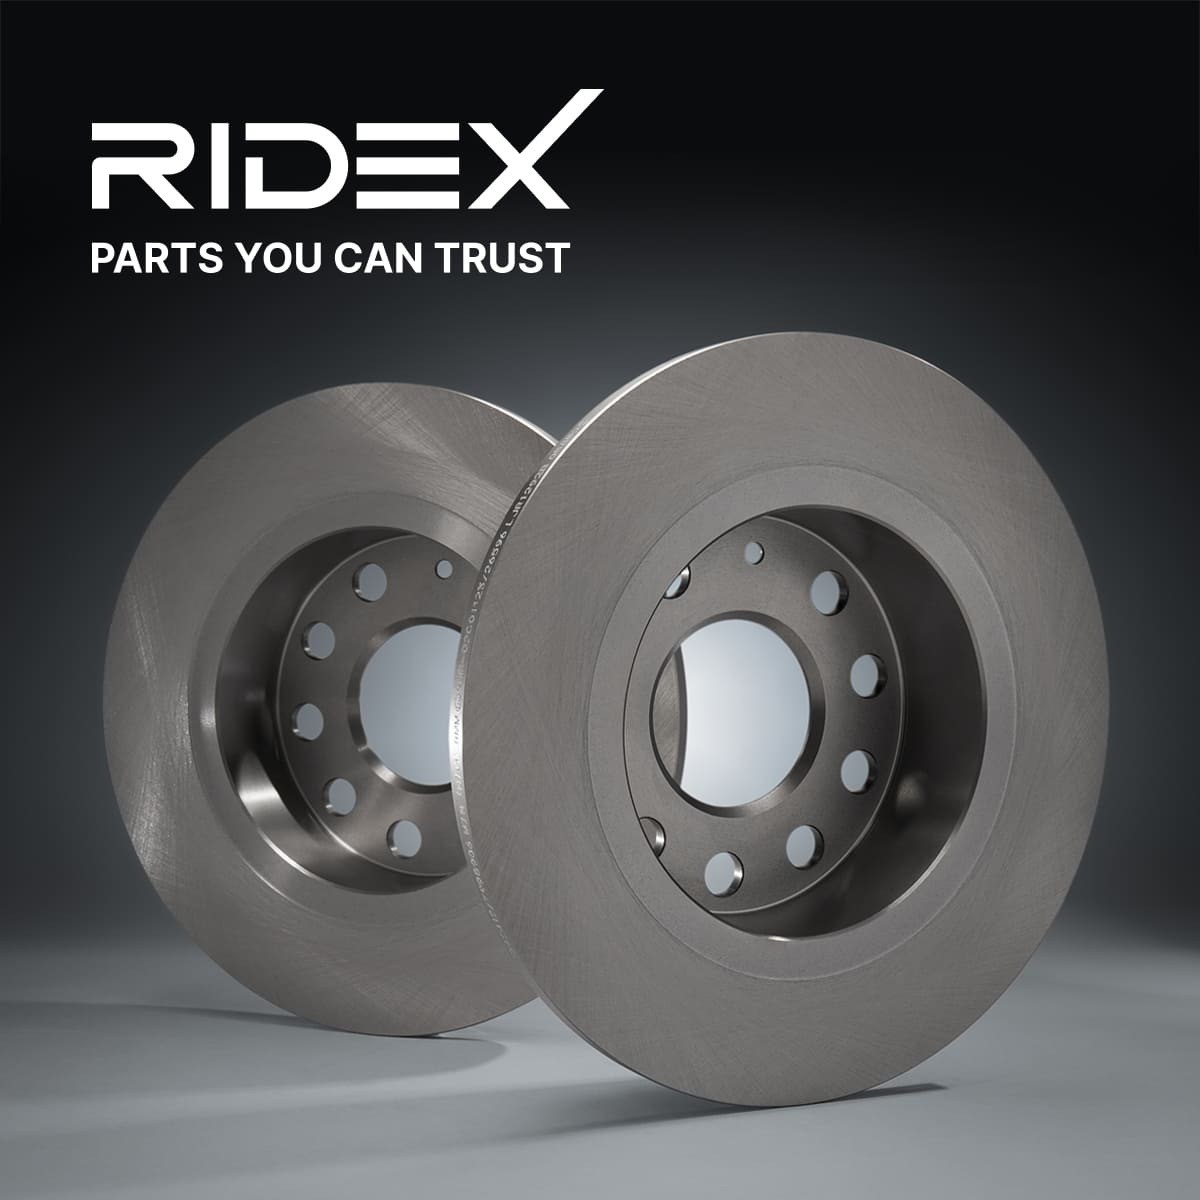 82B0230 Brake discs 82B0230 RIDEX Front Axle, 280,0x22mm, 4/6x114,3, internally vented, Uncoated